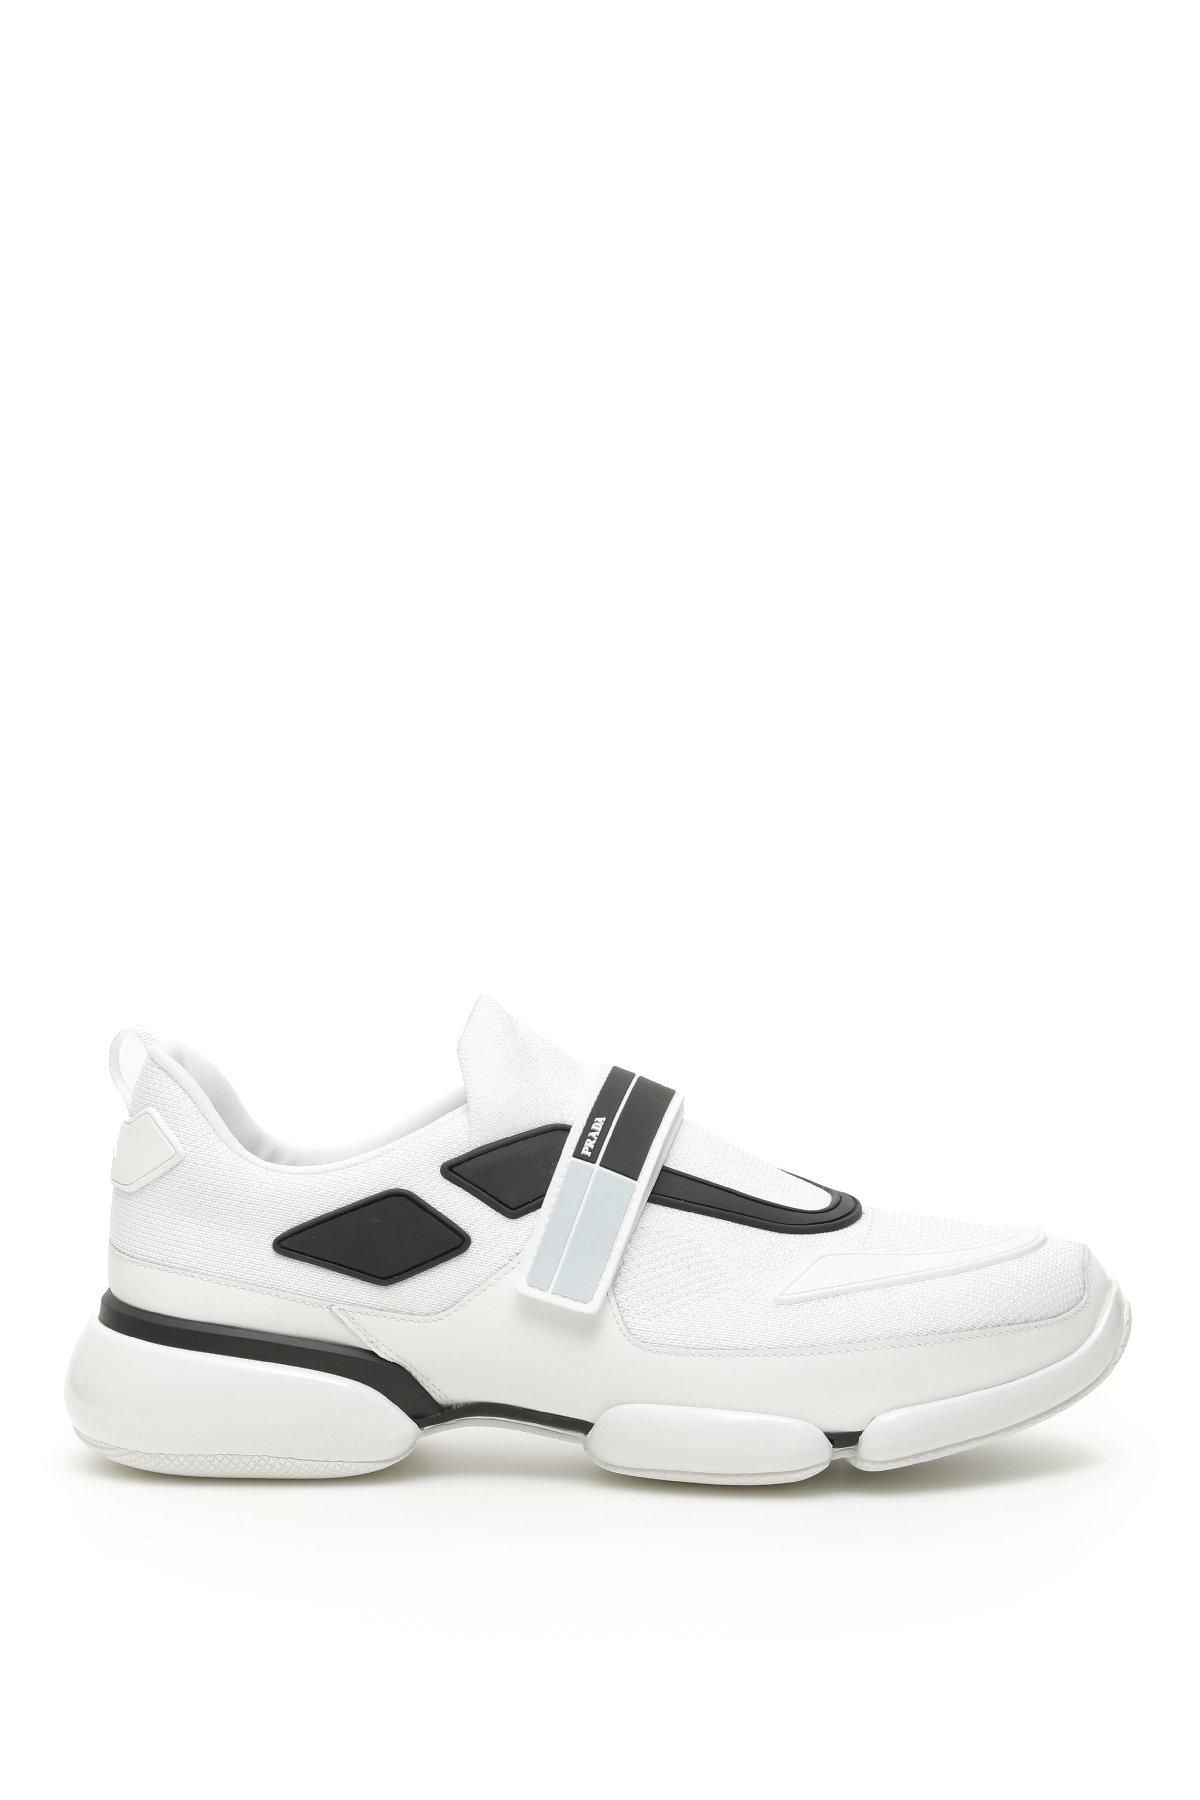 Prada Leather Cloudbust Sneakers for Men - Save 63% | Lyst